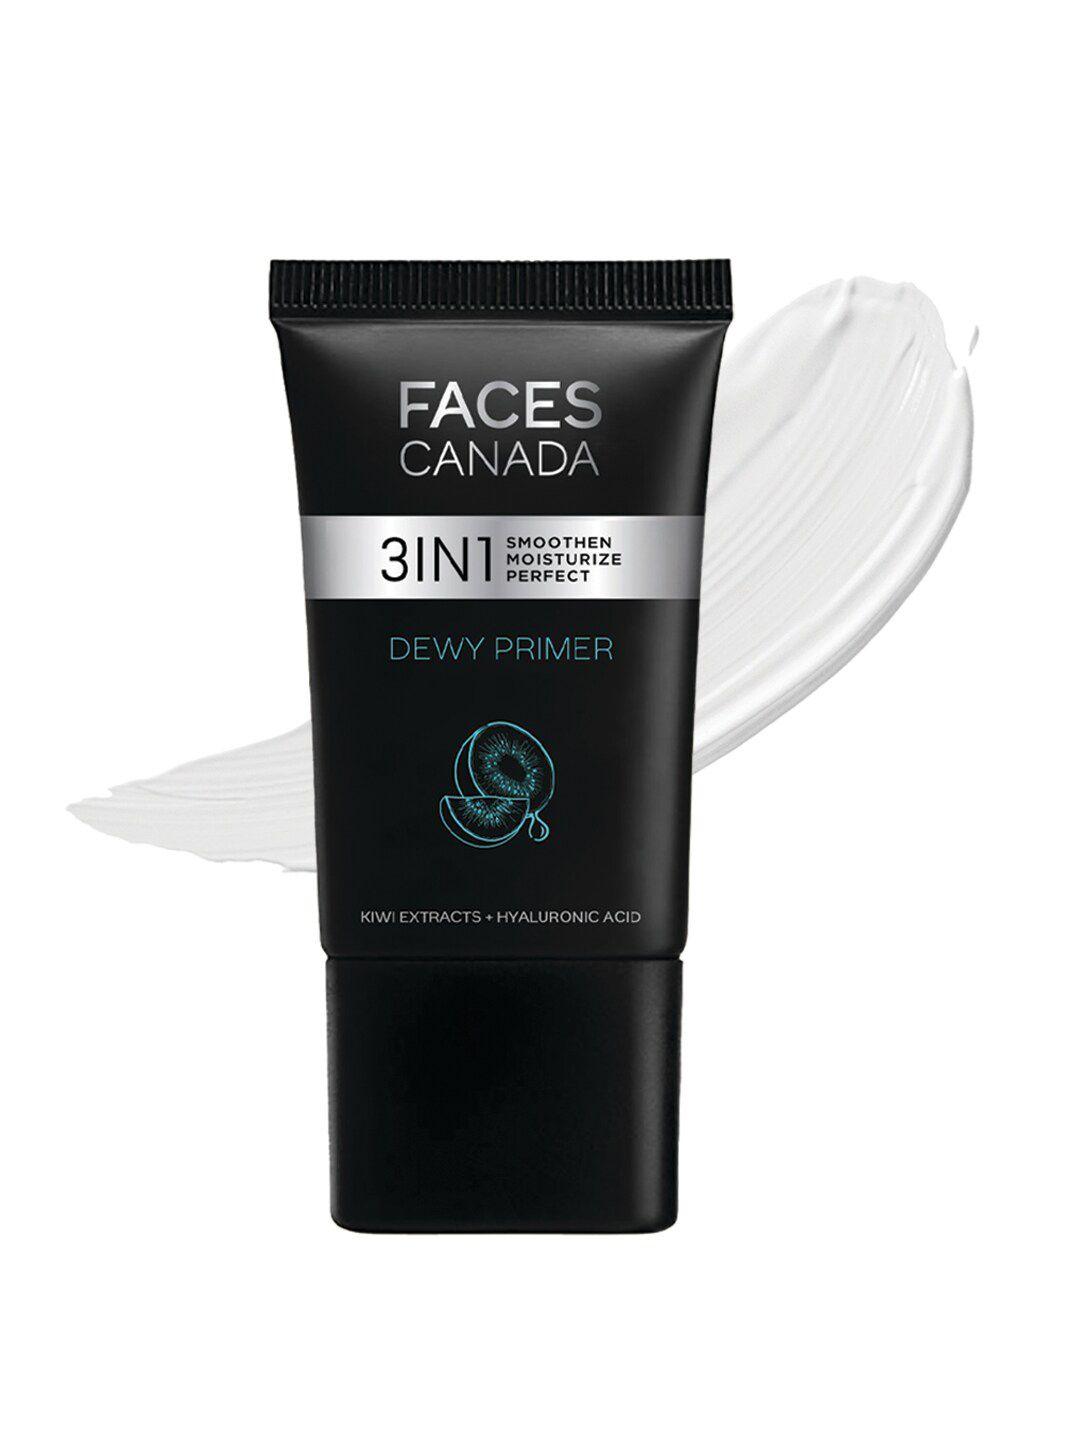 faces canada 3 in 1 smoothen moisture perfect dewy primer with hyaluronic acid - 30gm